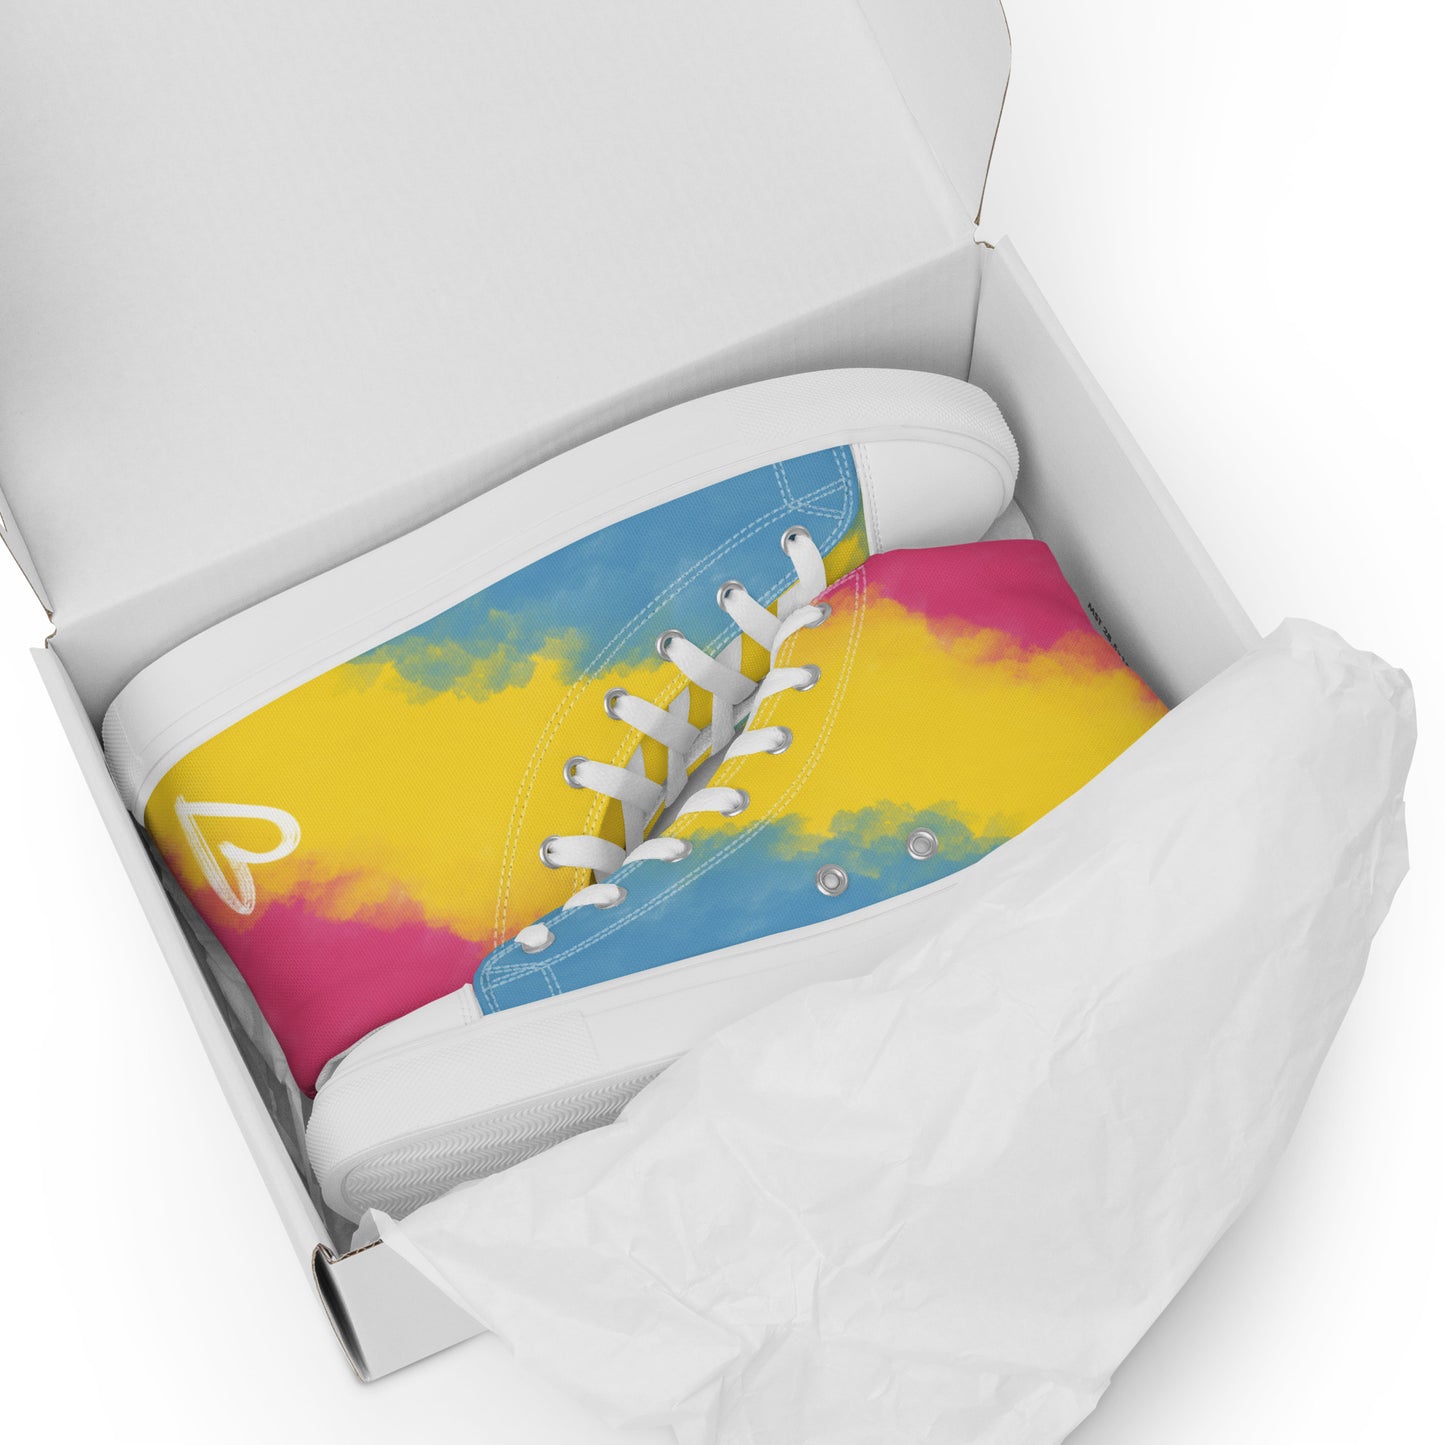 A shoebox is open to reveal a pair of high top shoes with color block pink, yellow, and blue clouds, a white hand drawn heart, and the Aras Sivad logo on the back.